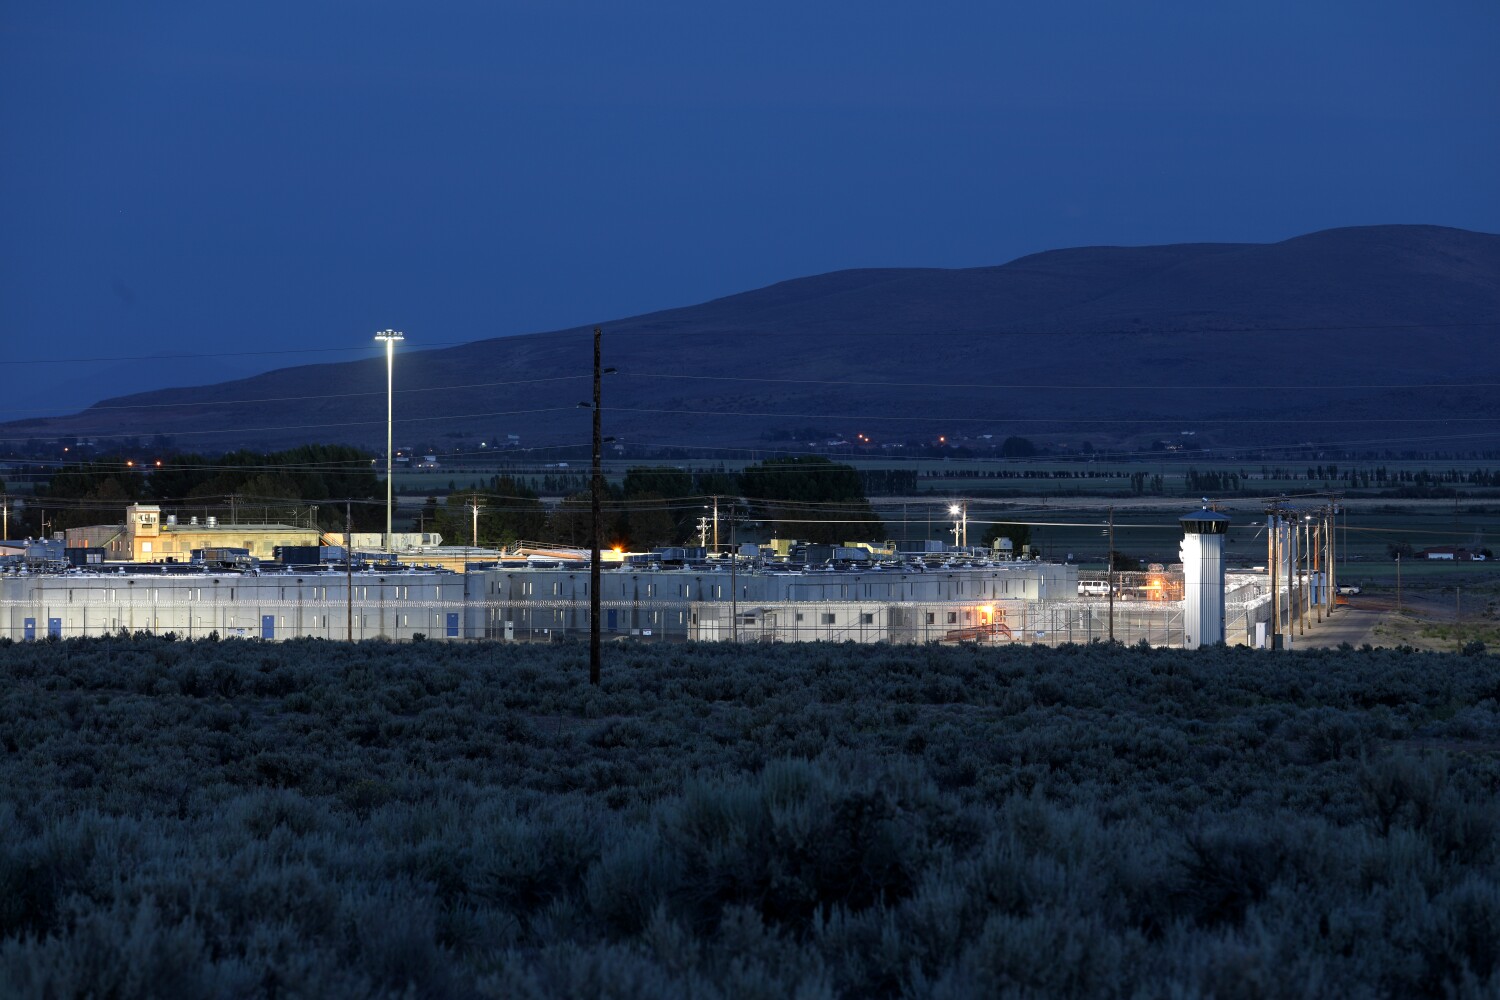 A rural California prison was set to close this summer. It's still open, and inmates want a say